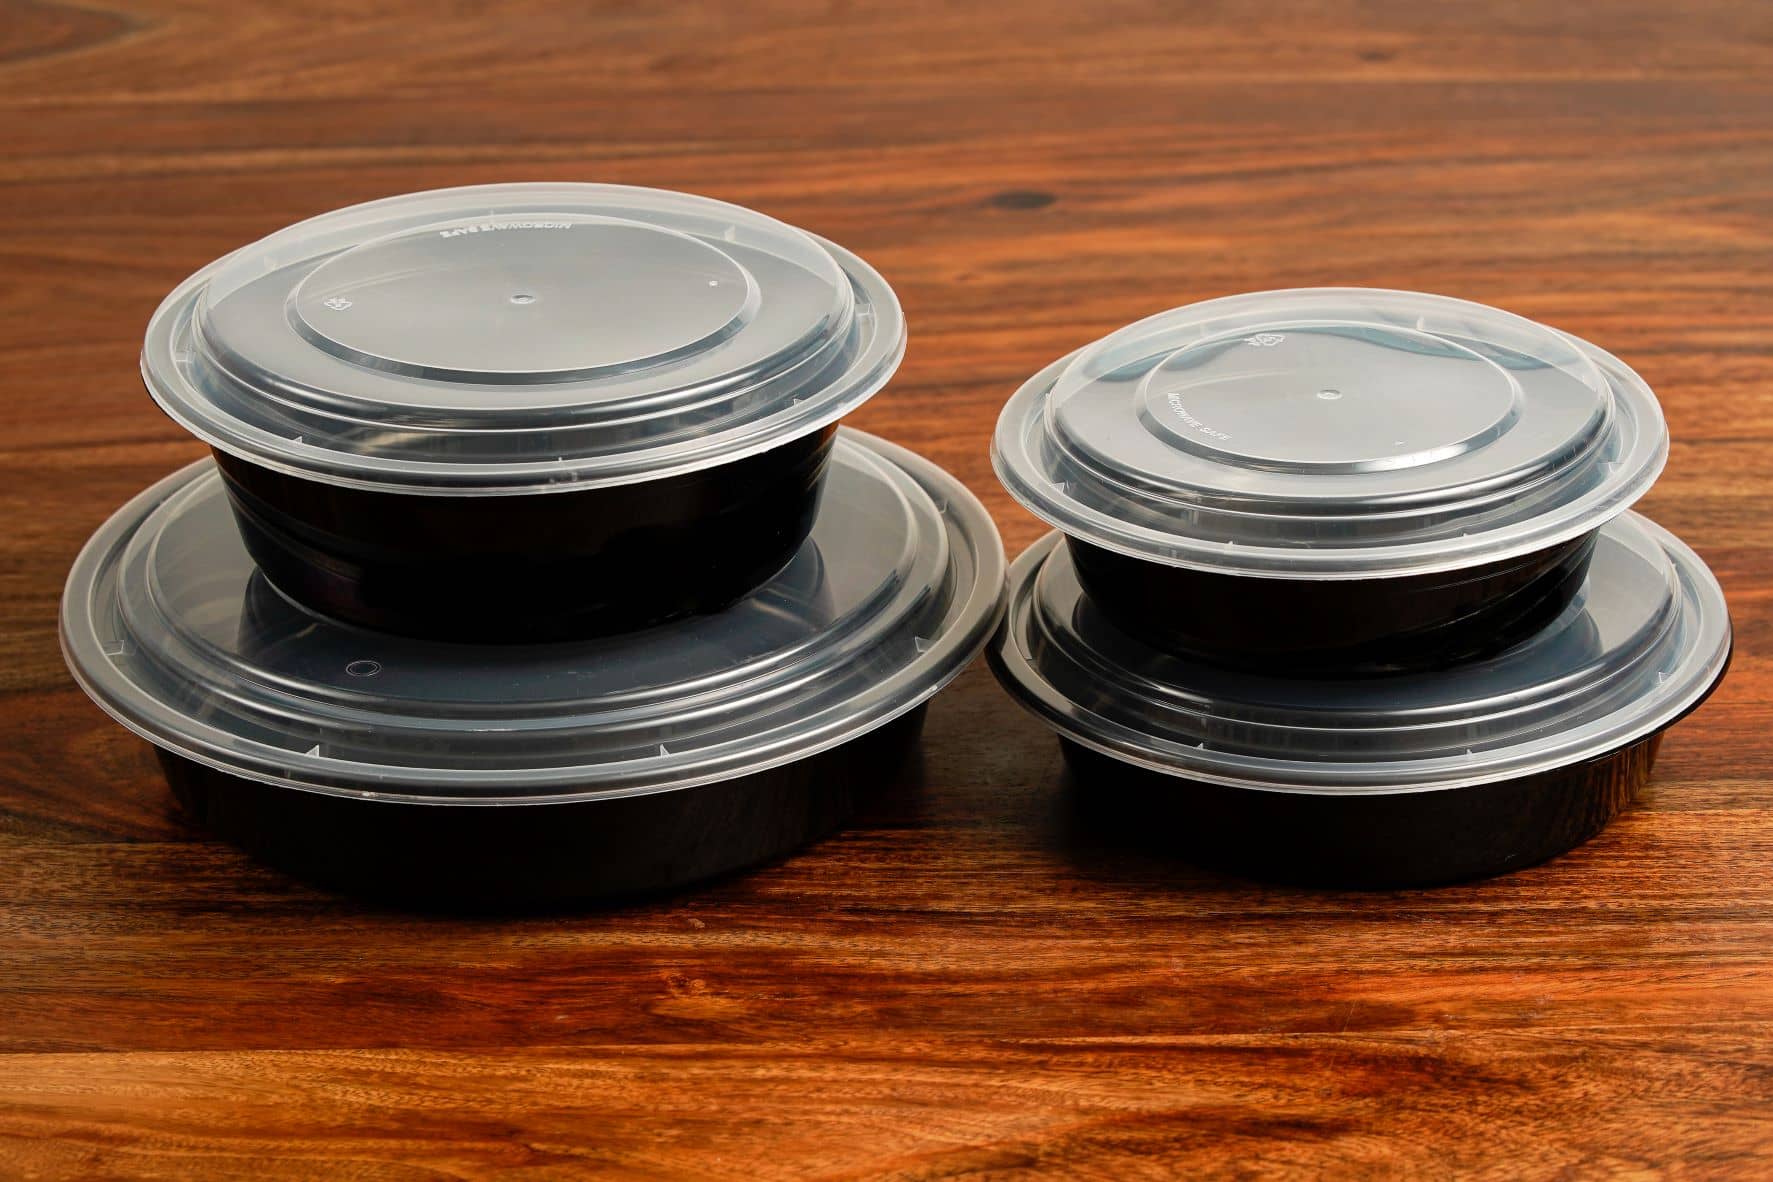 Clamshell Clear To-Go Container - Seattle Restaurant Supply